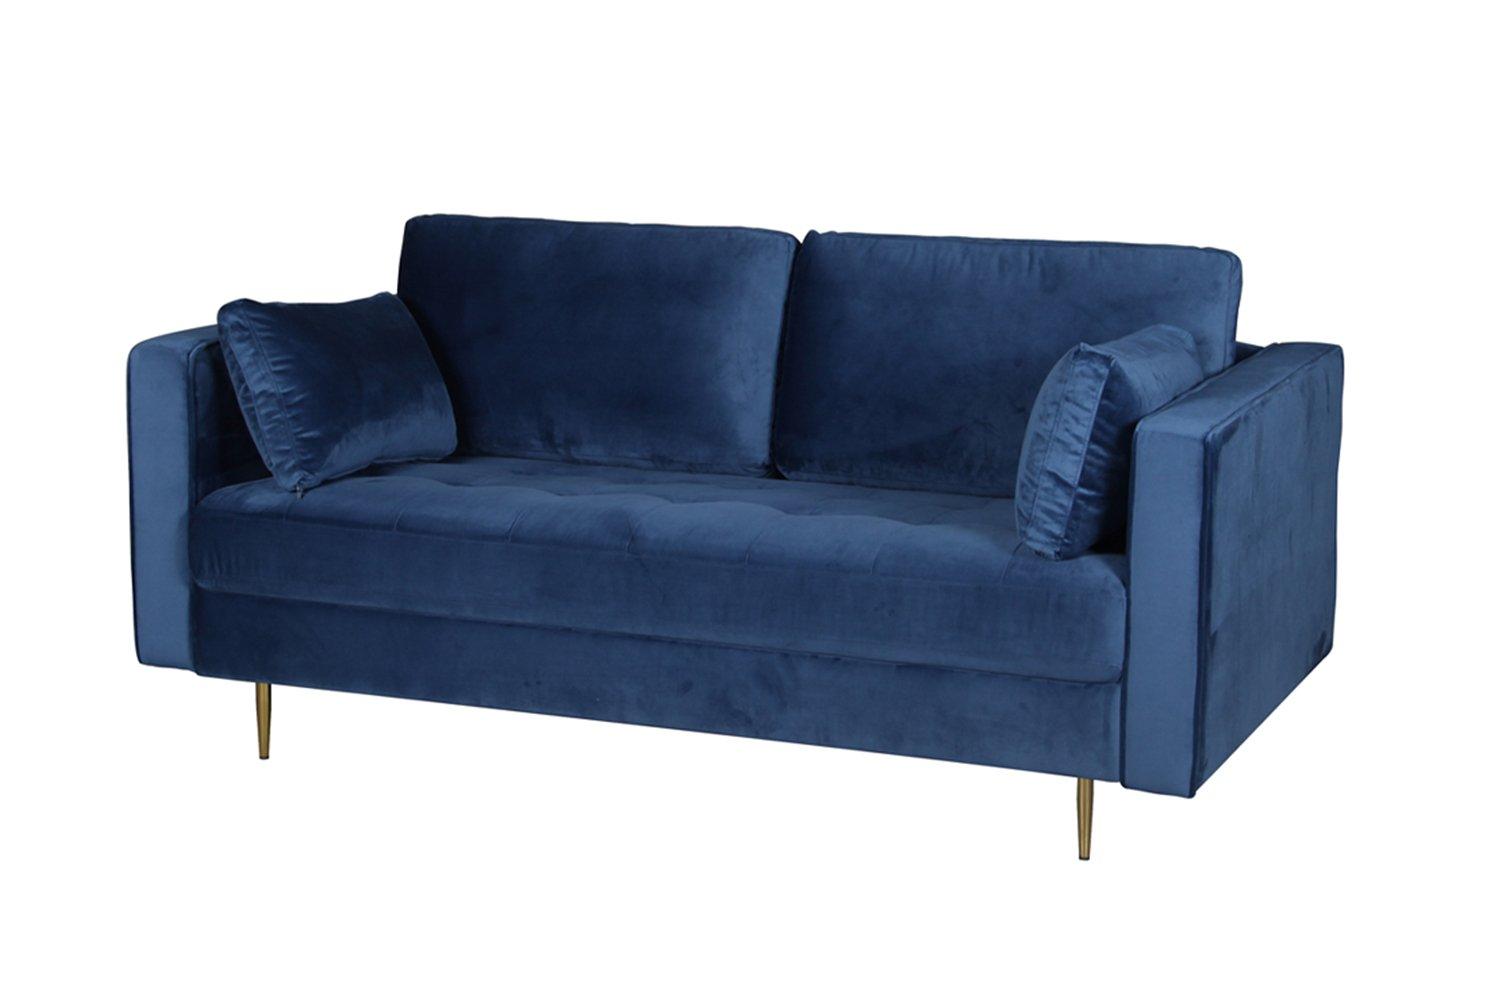 Avery Velvet 2 Seater Sofa with 2 Scatter Cushions